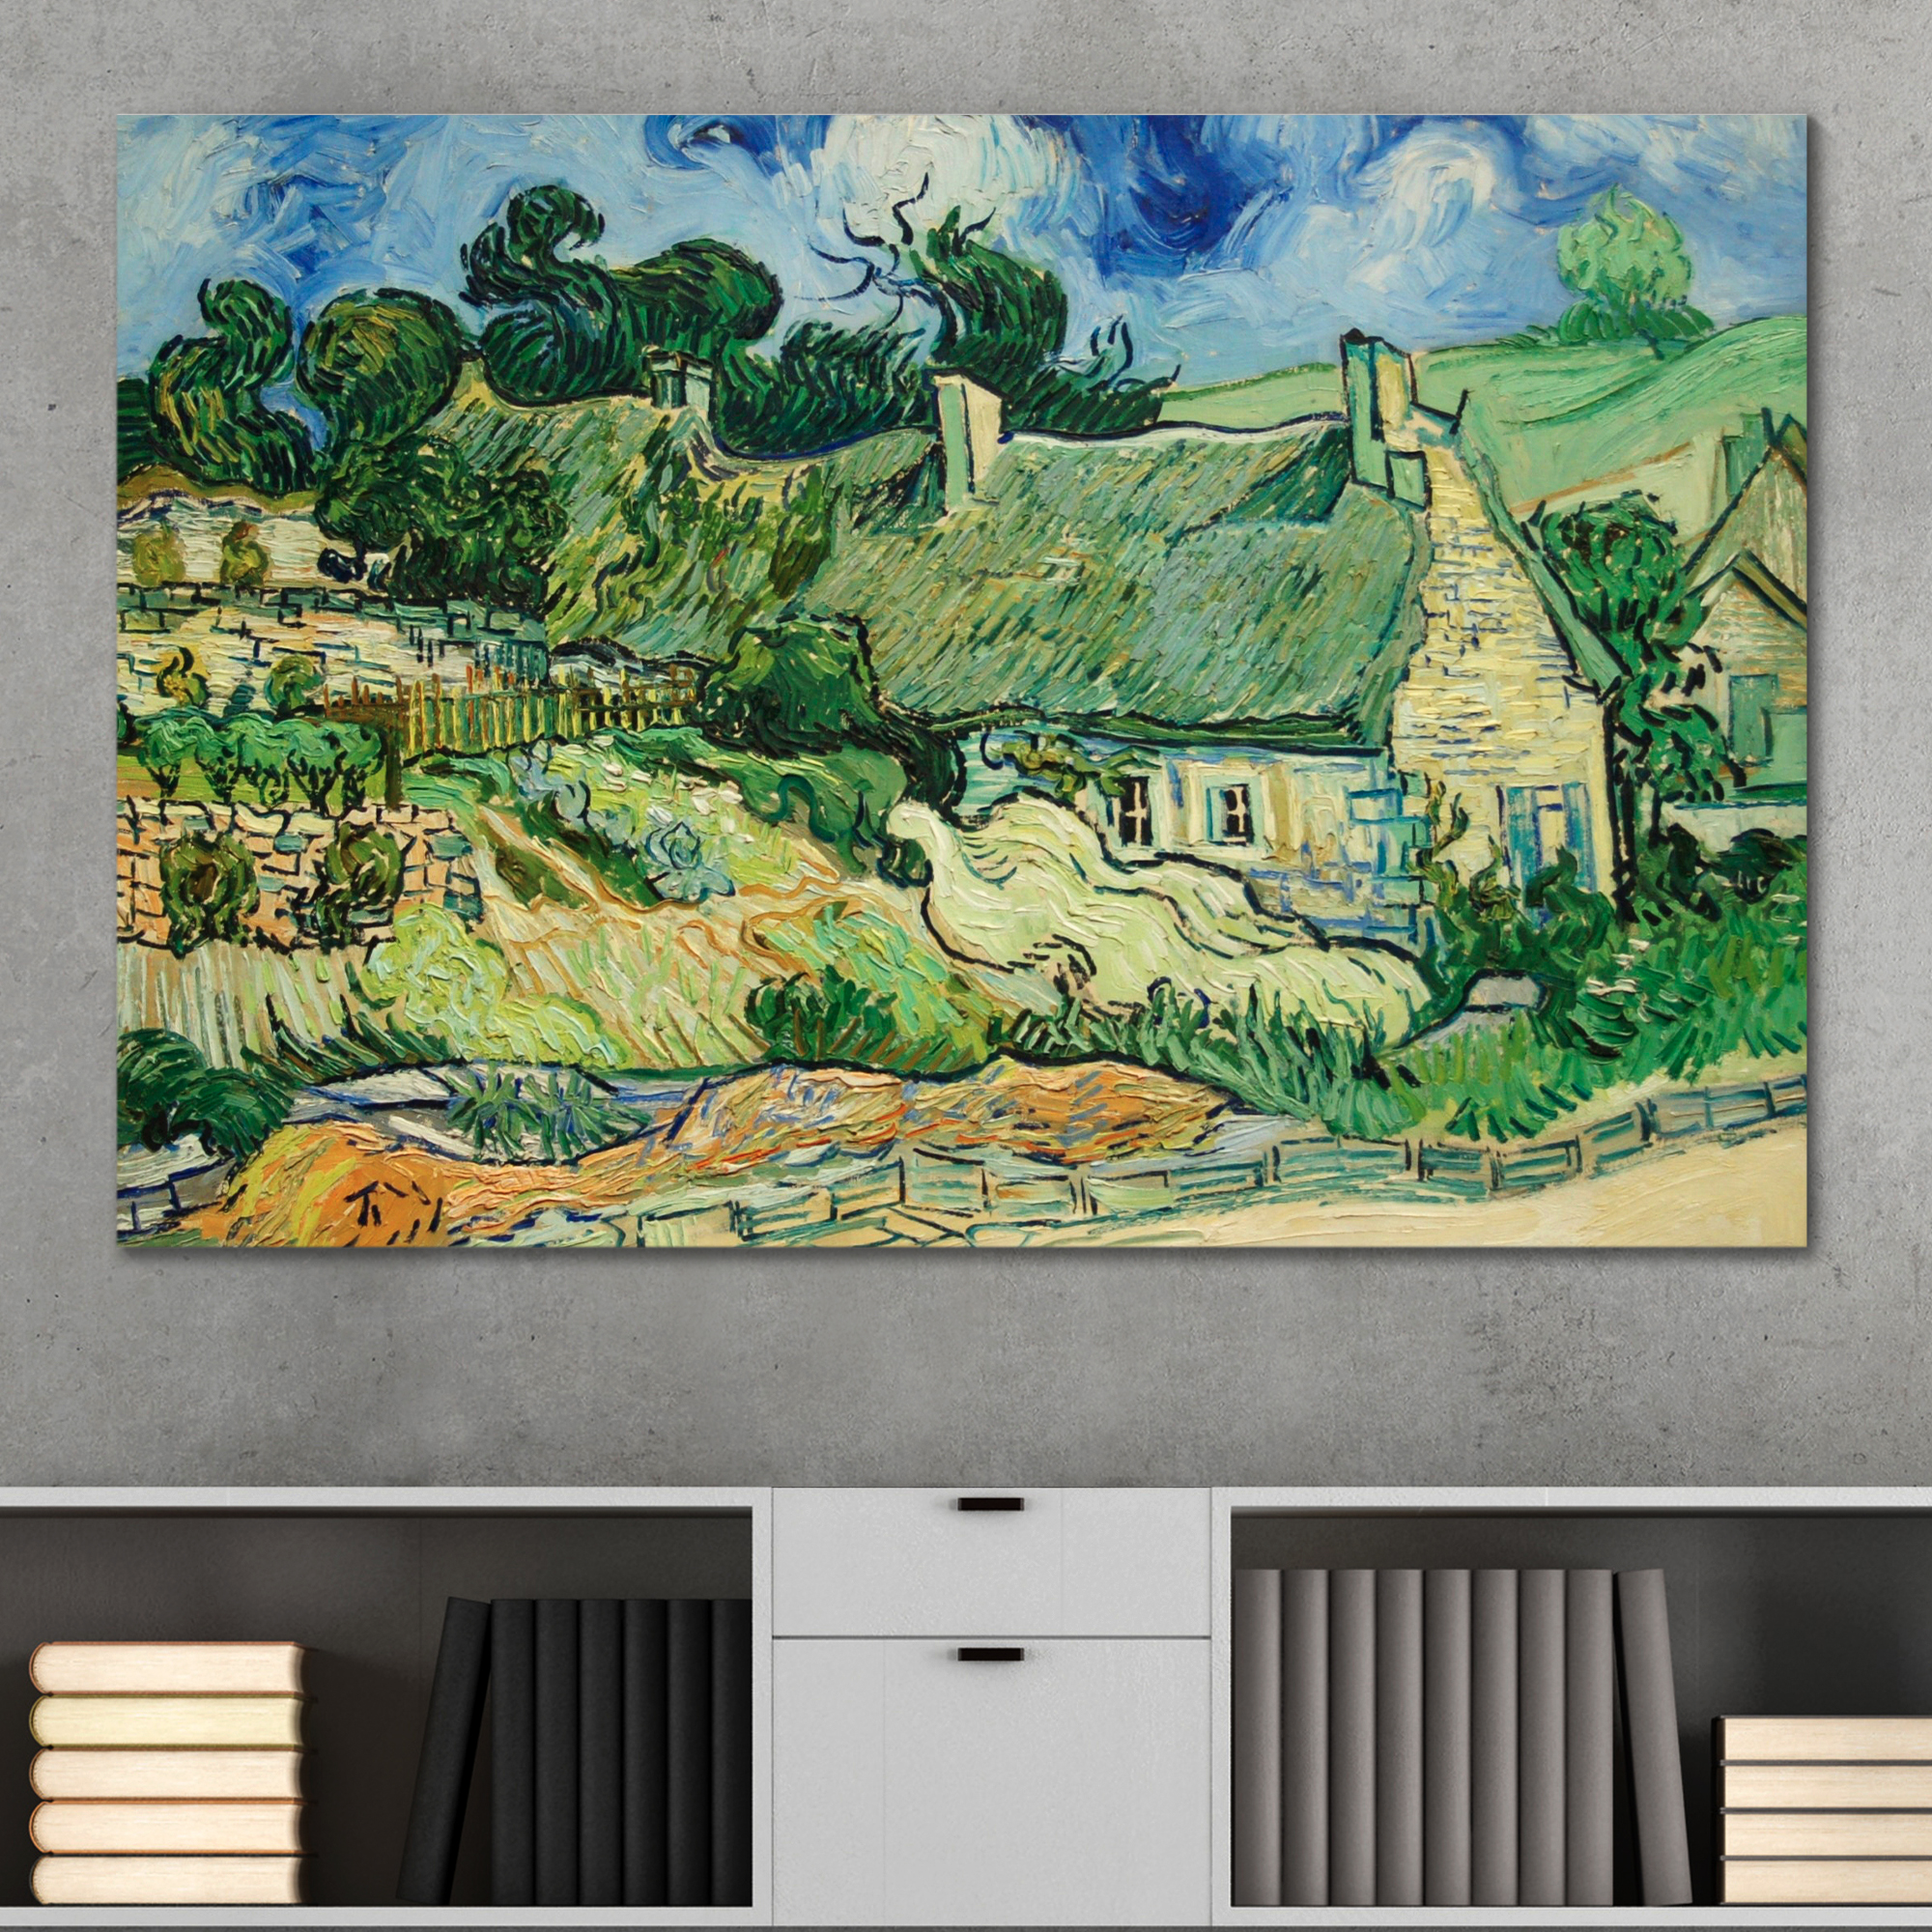 Thatched Cottages at Cordeville by Vincent Van Gogh - Canvas Print Wall Art Famous Painting Reproduction - 24